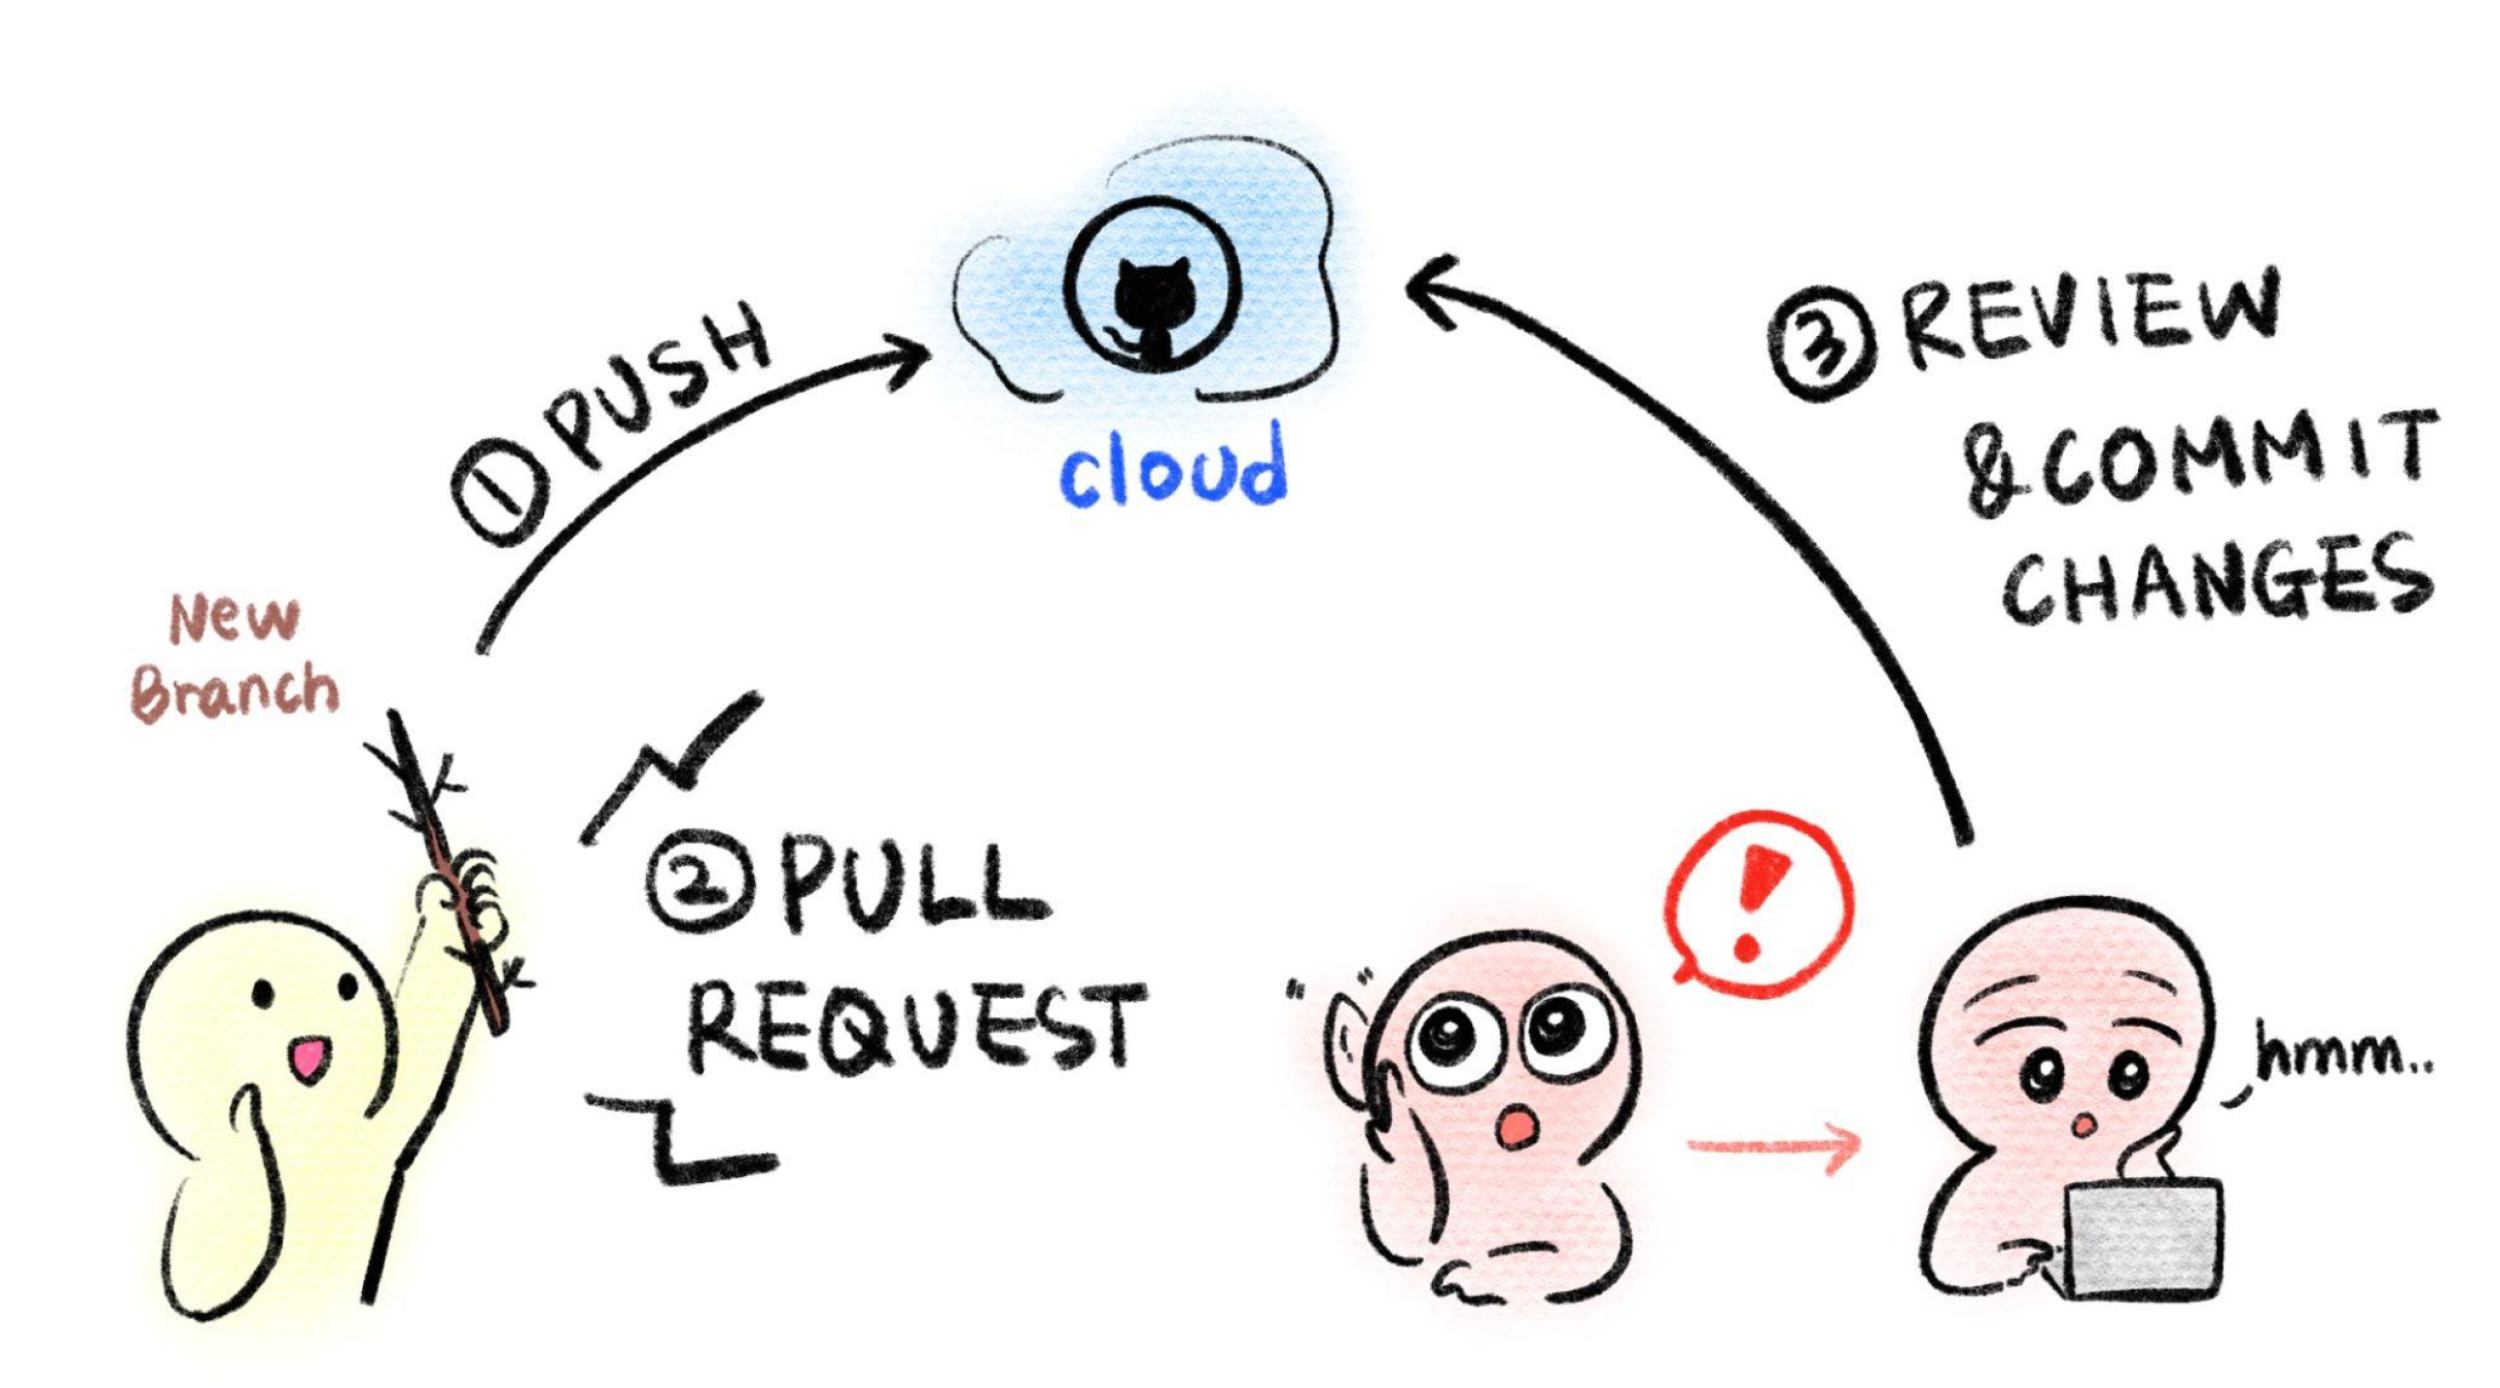 A simple illustration of how you can update codes and work together on GitHub. After you create and make updates to your new branch, you can push your changes to the GitHub cloud. Then, on the GitHub, you create a pull request, for others to come and review. Upon receiving the pull request, other users can review the changes and commit updates to the main branch.